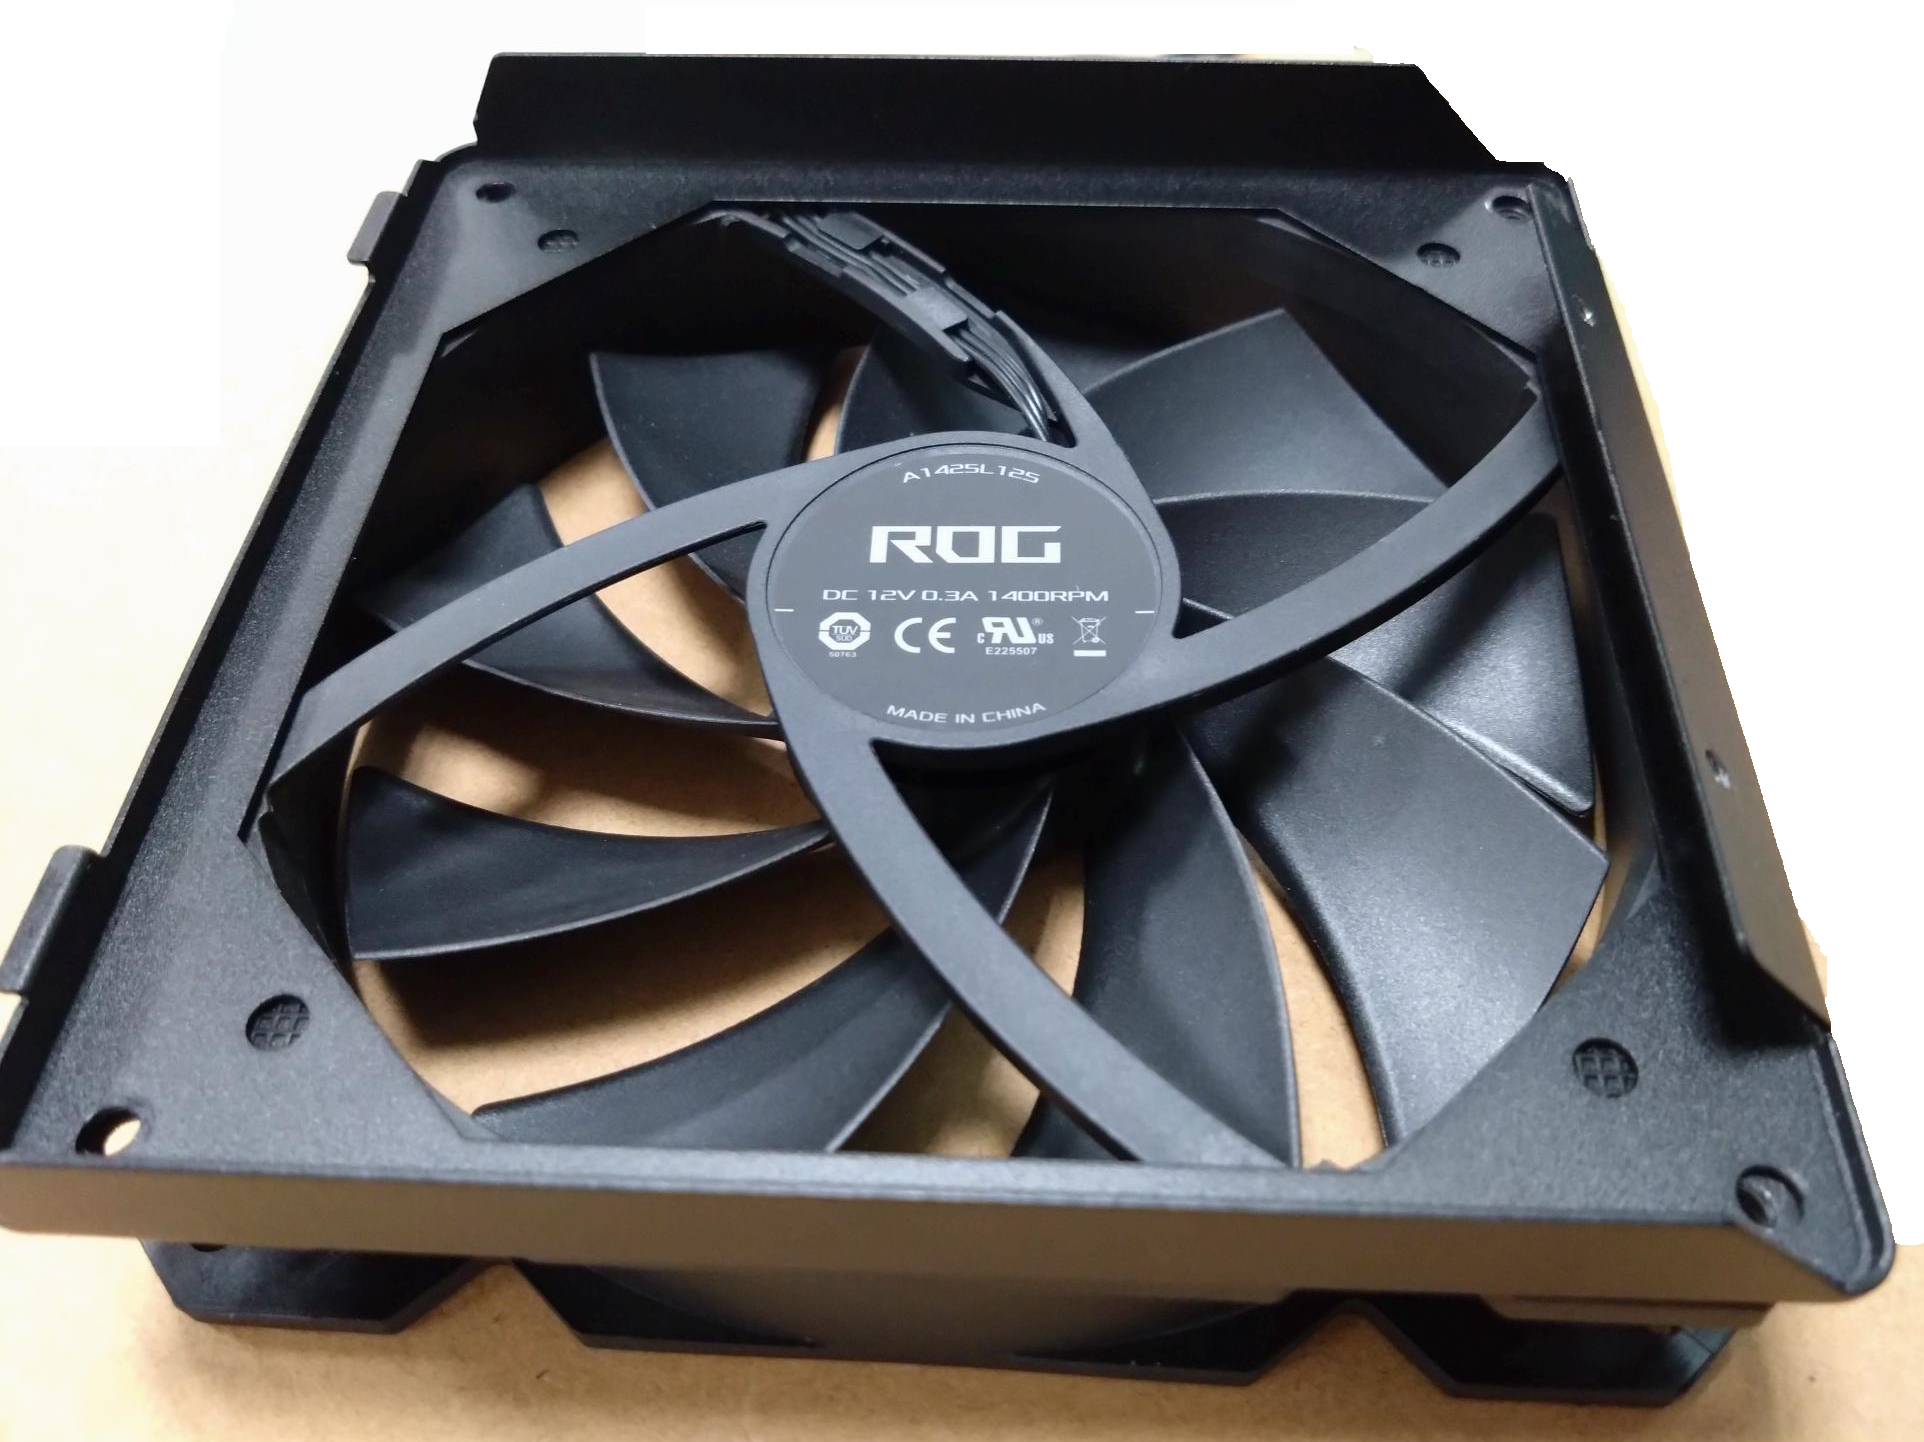 Montage ASUS ROG Hyperion GR701 – WC Alphacool inside! - Boutique